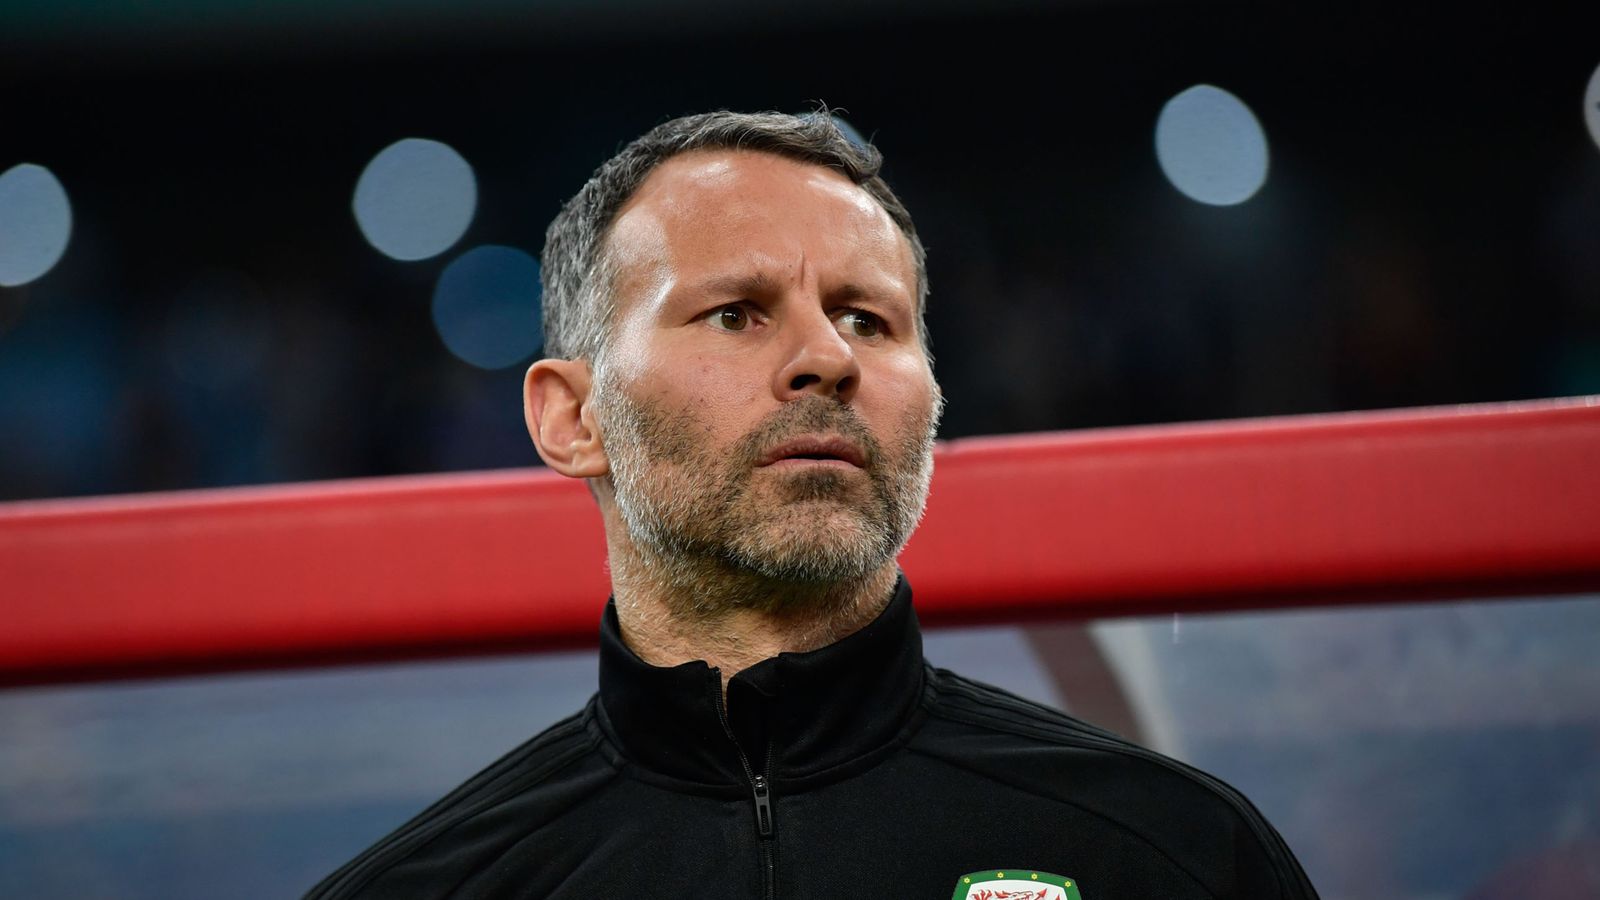 Wales v Uruguay preview: Ryan Giggs aims for China Cup success | Football News | Sky Sports